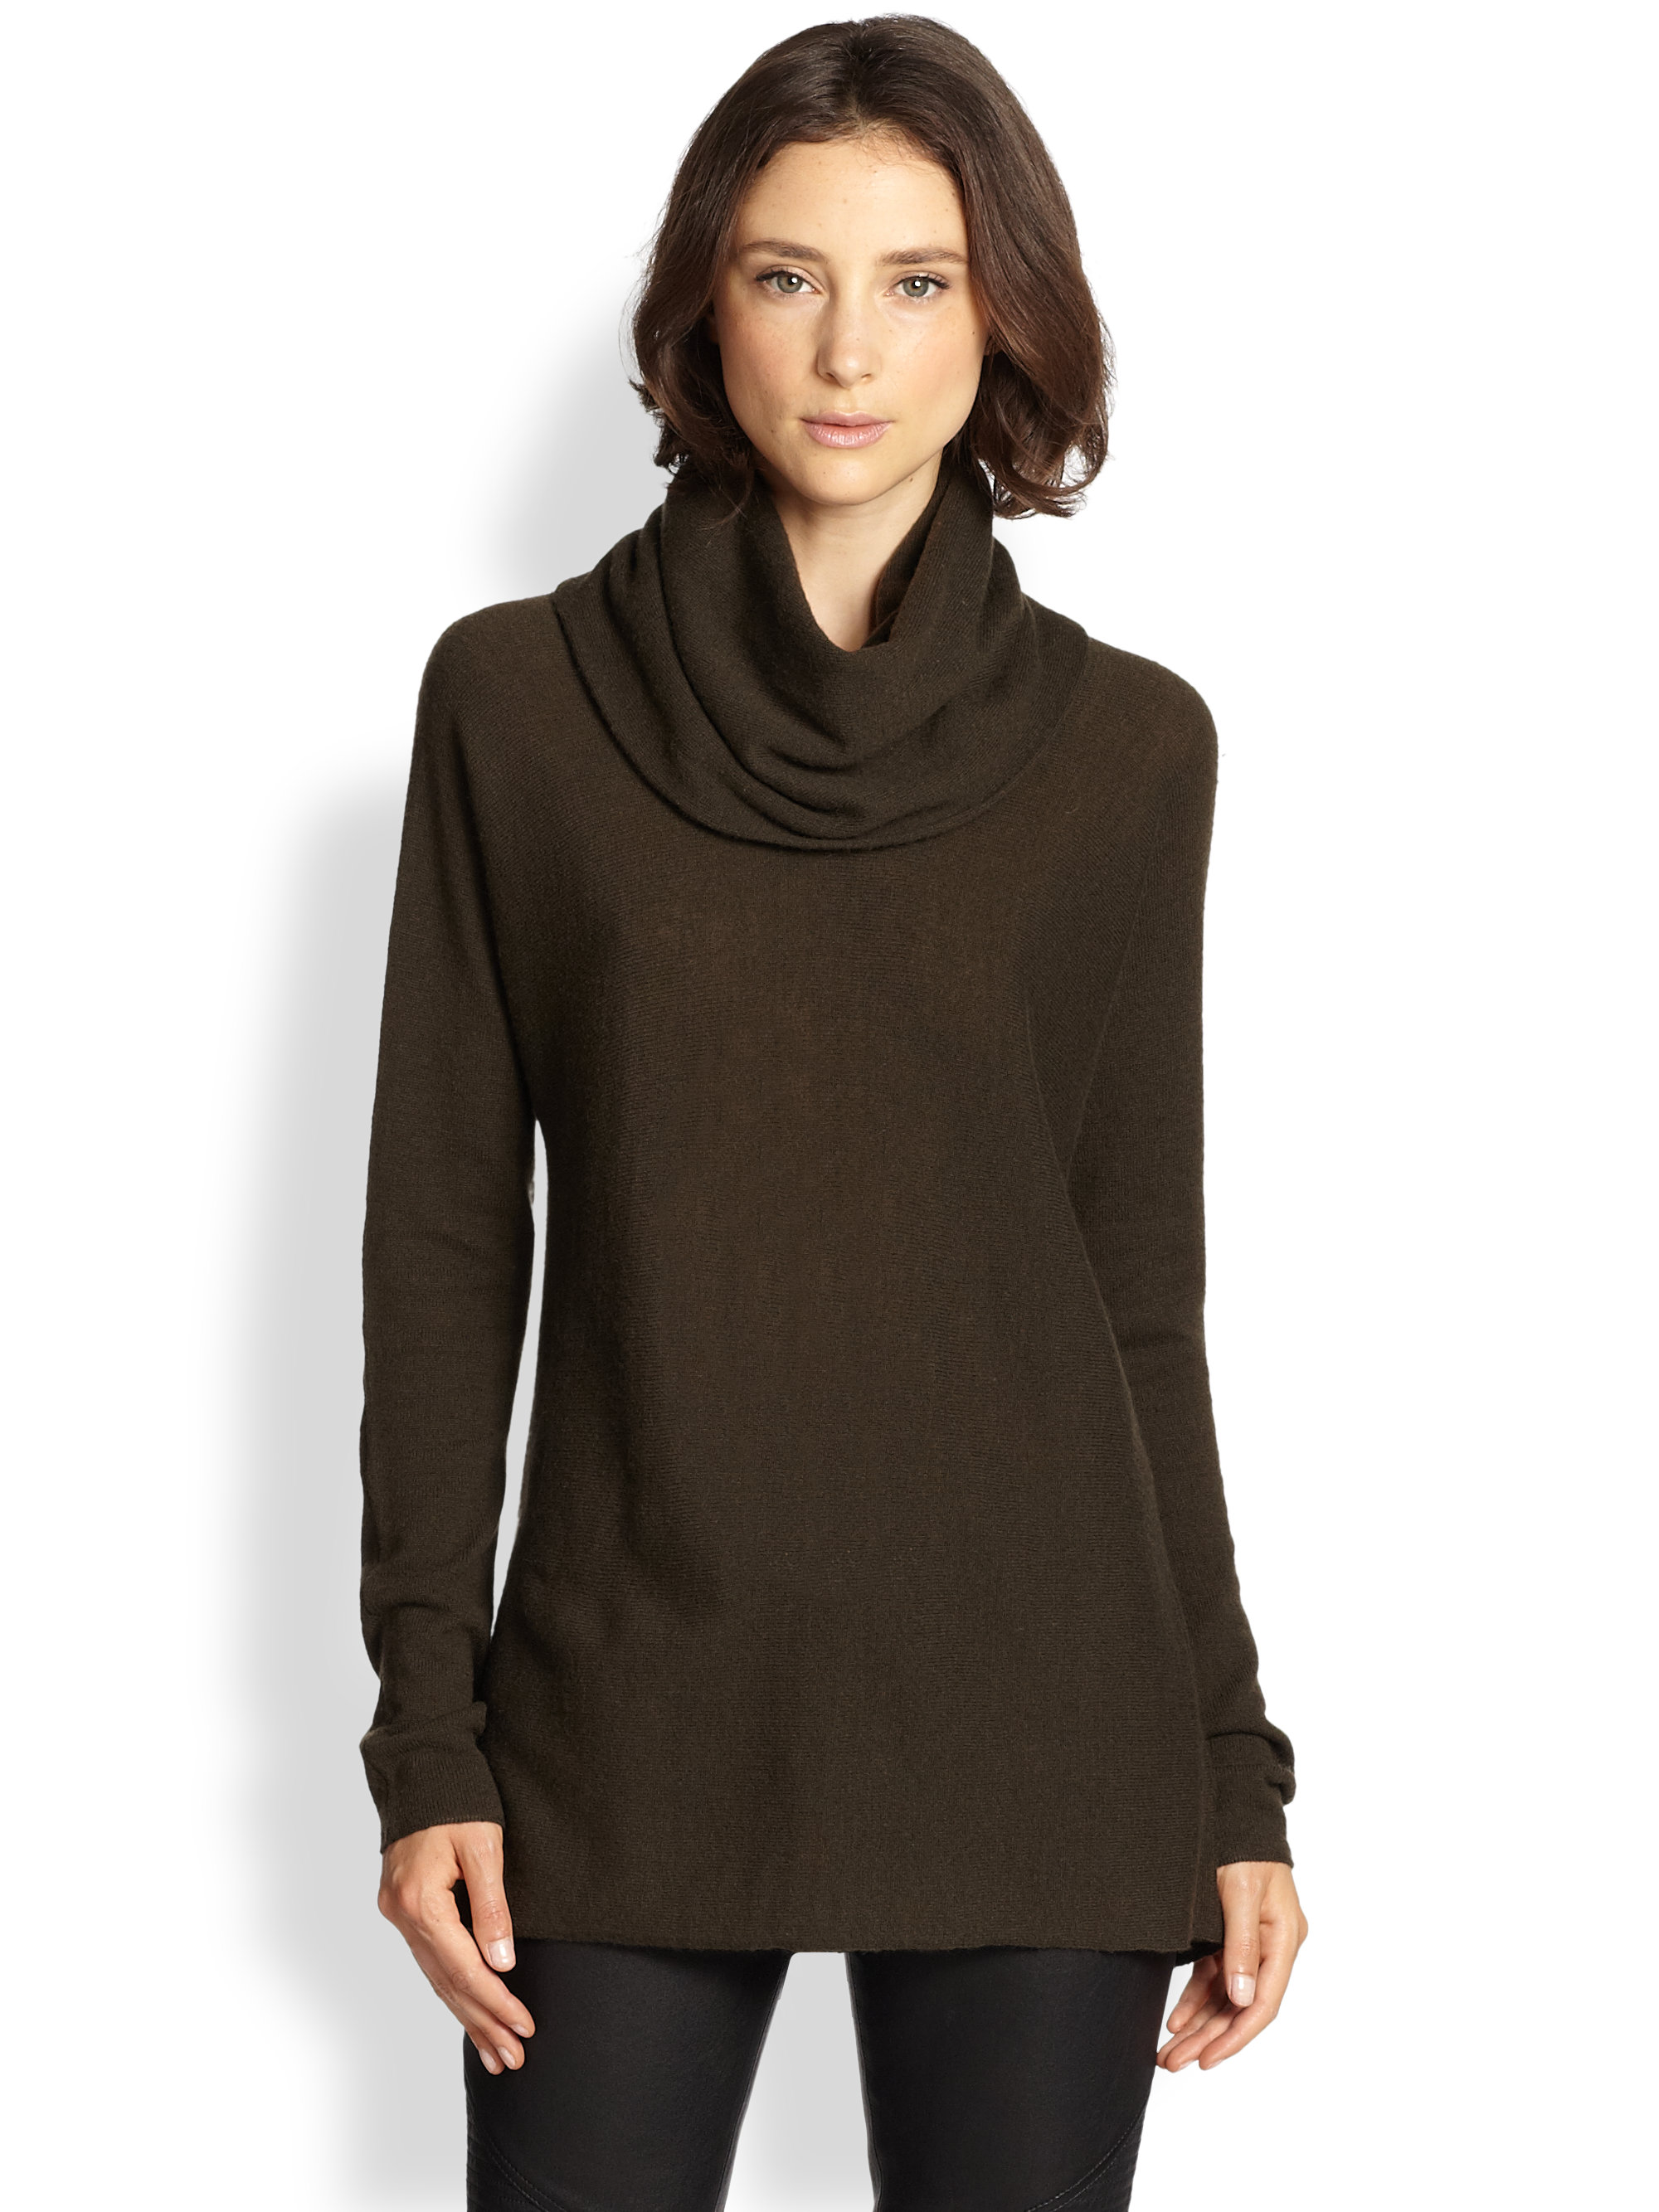 Lyst - Vince Cashmere Cowlneck Sweater in Brown